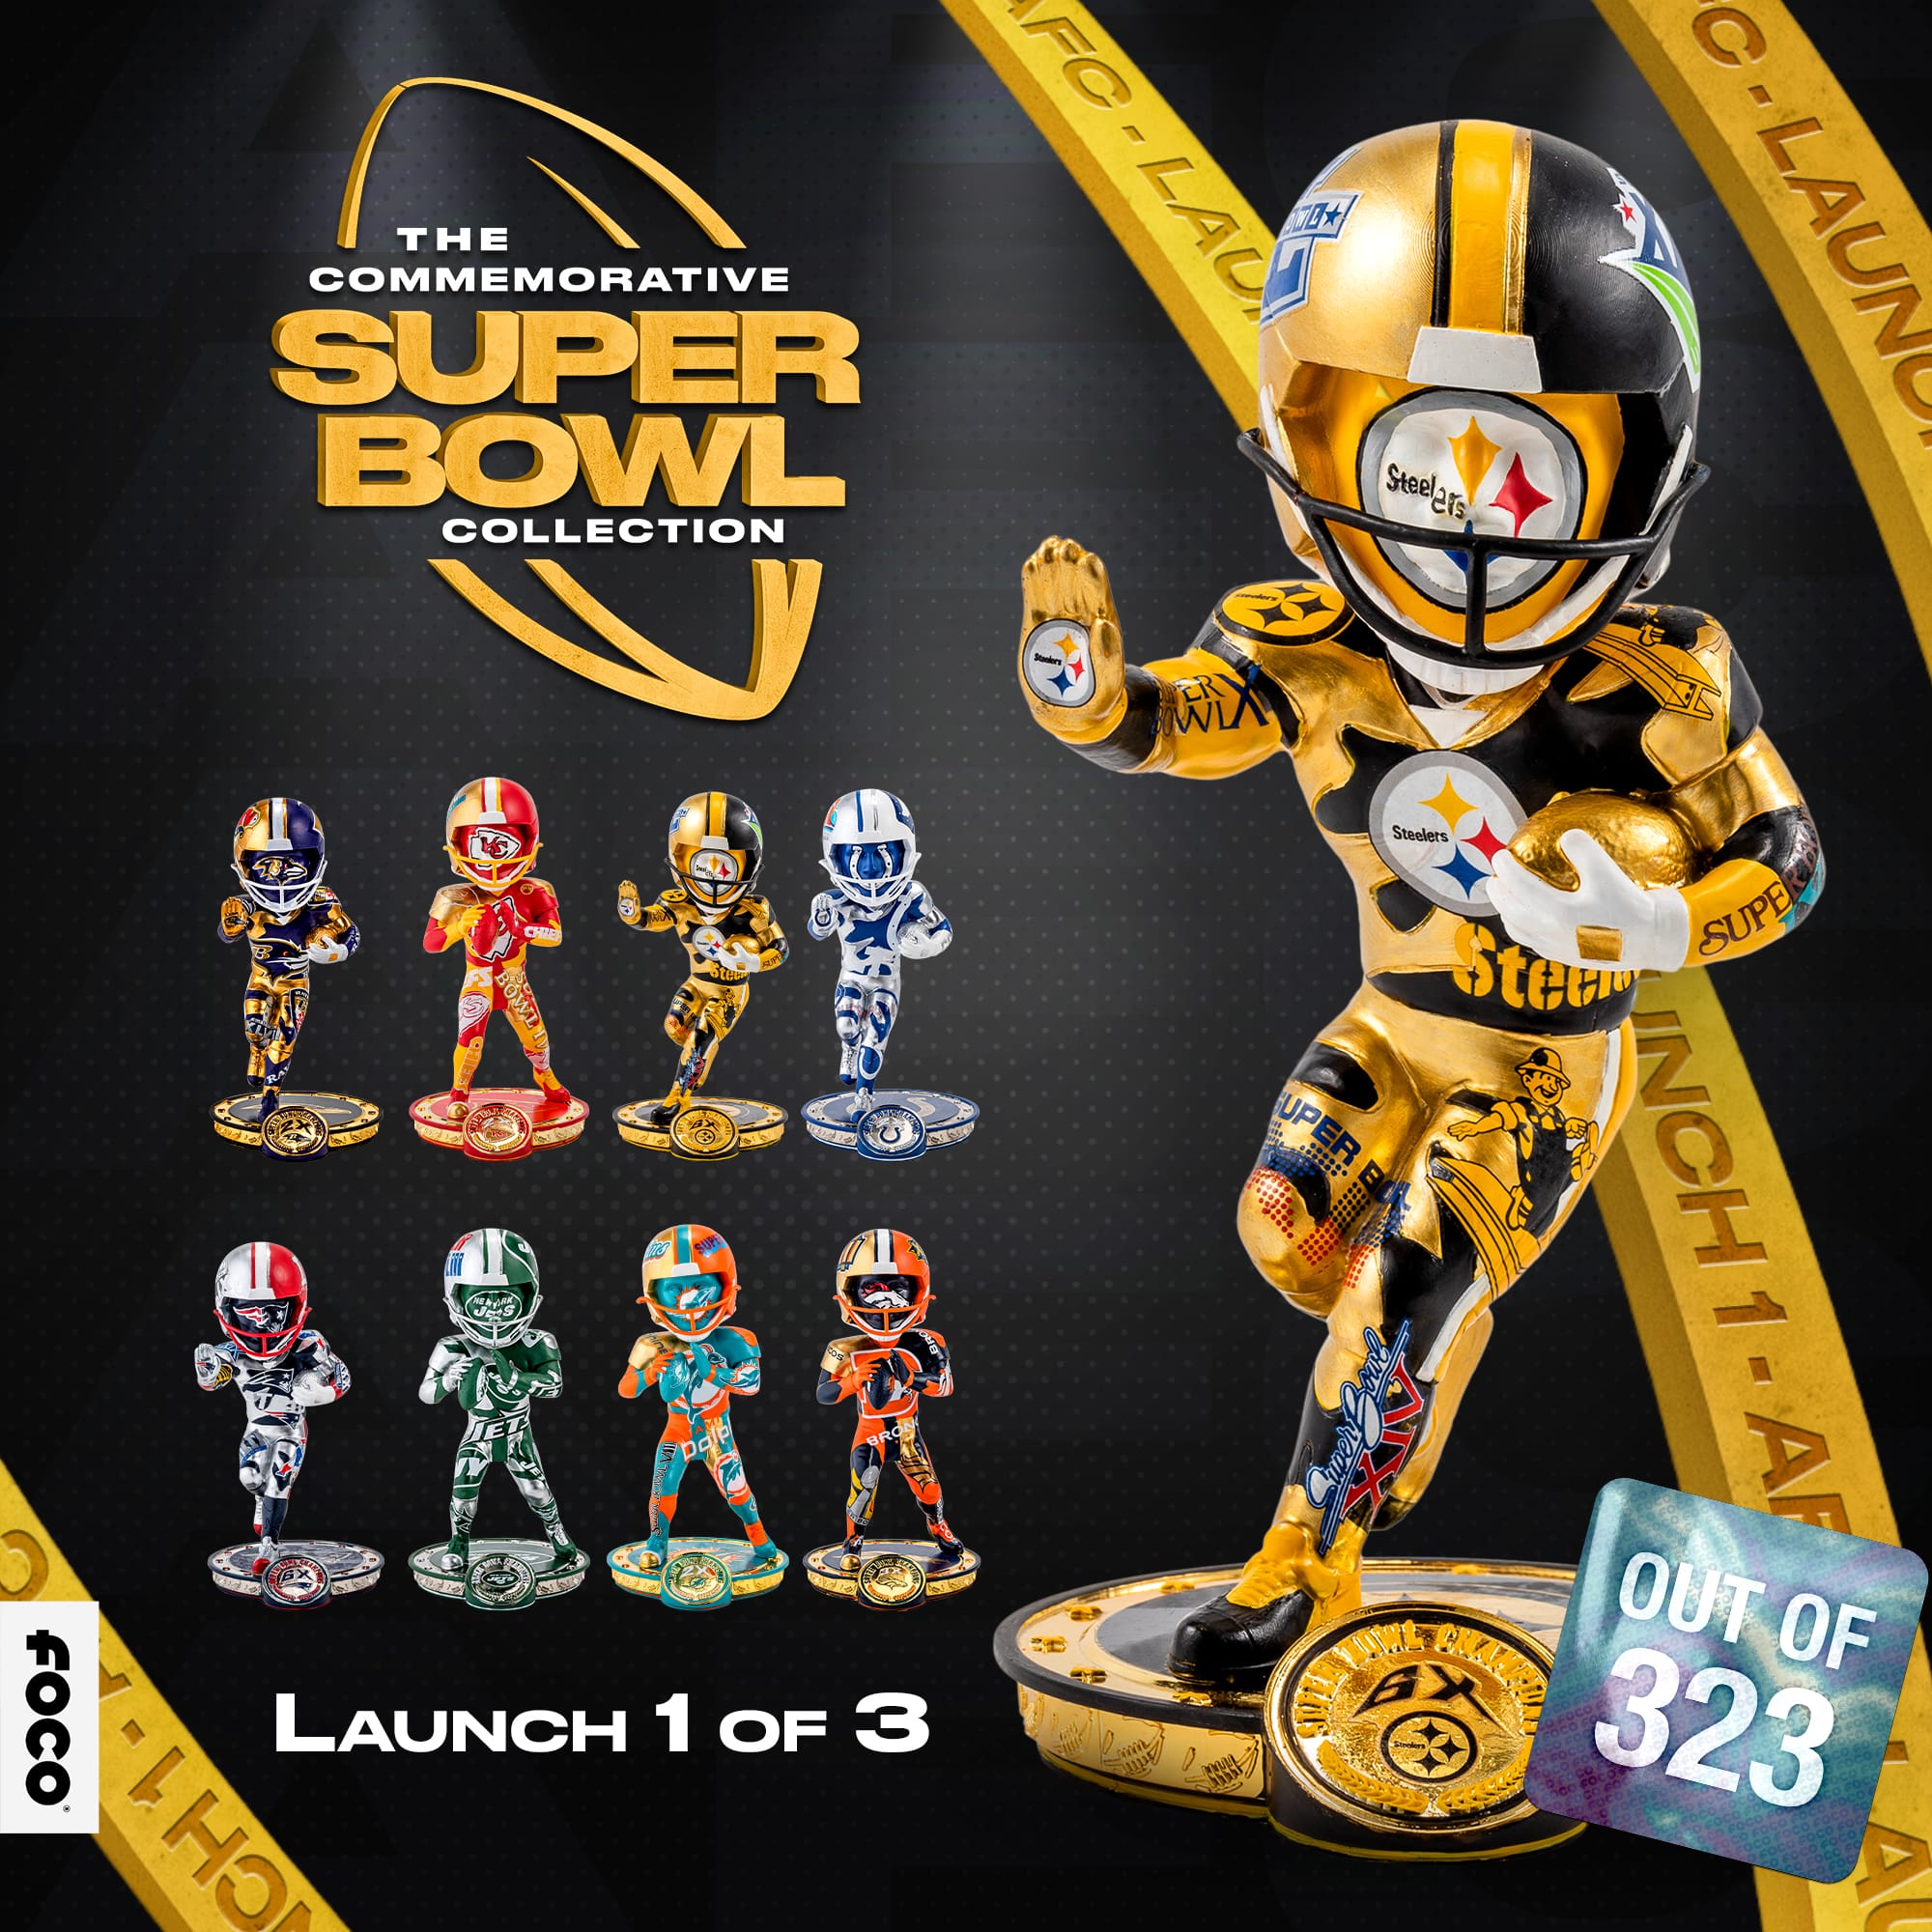 These new collectible bobbleheads honor NFL Super Bowl winners including  Steelers, Eagles 